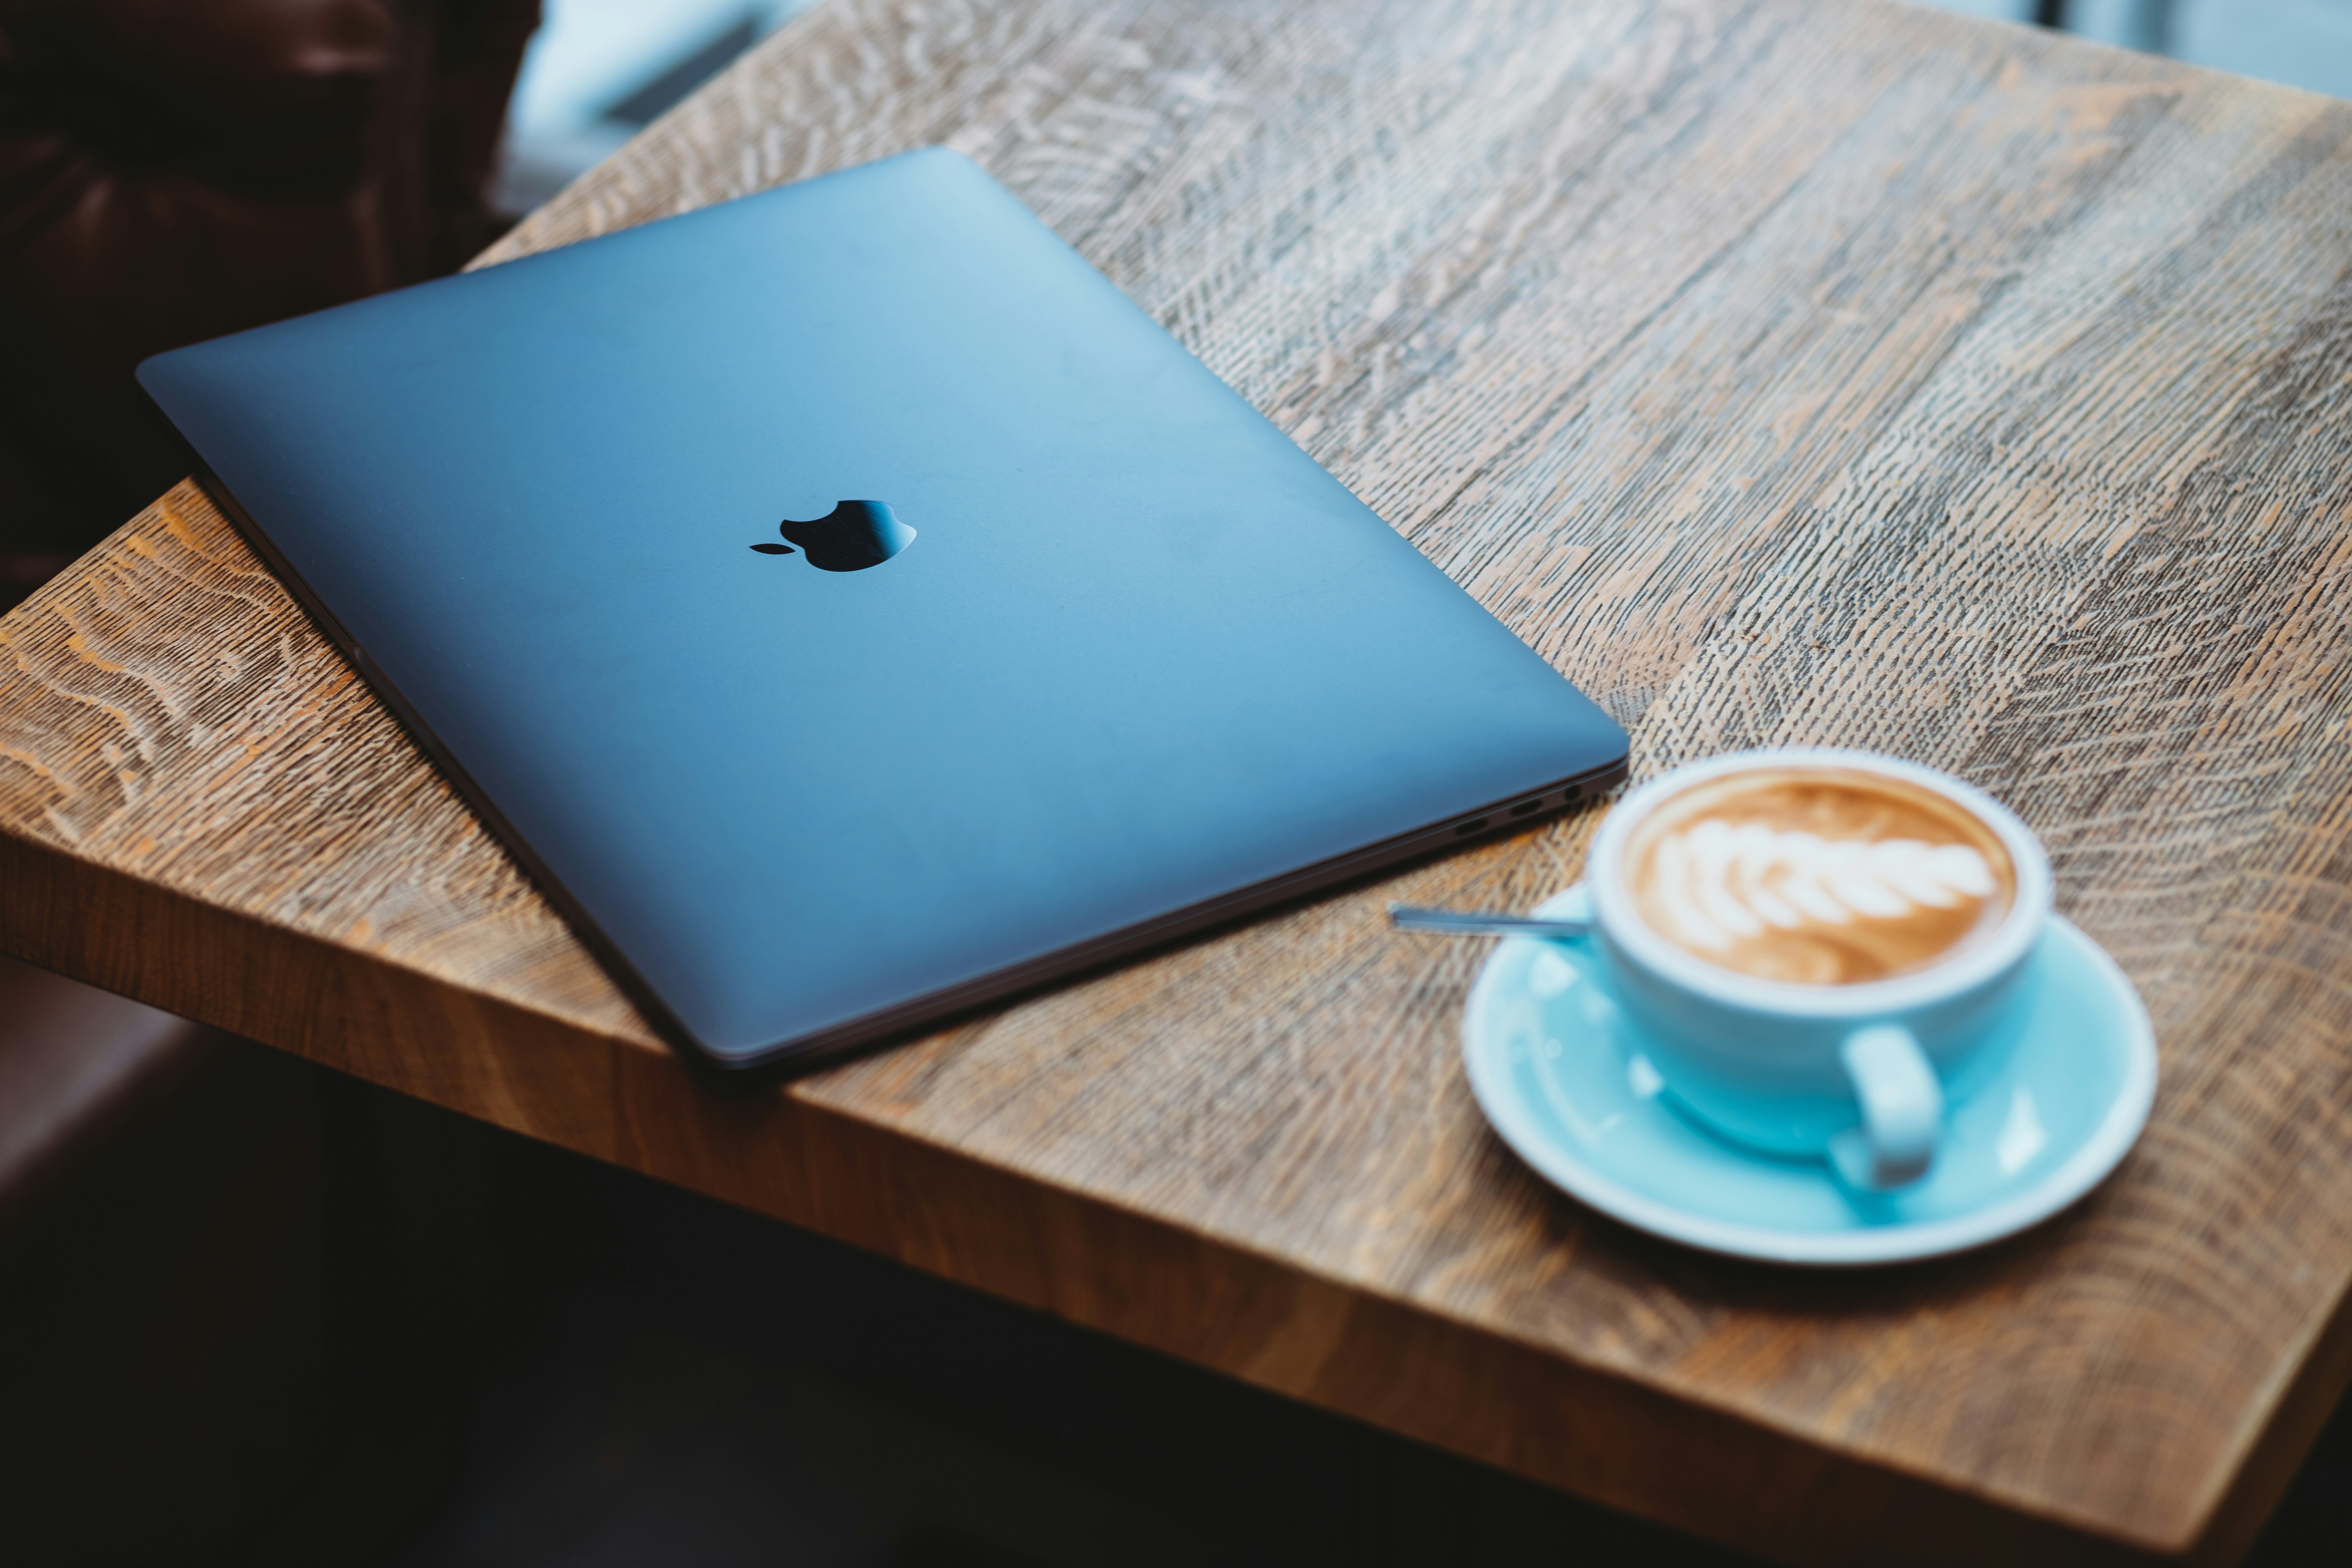 The layout of a Macbook pro computer with a cup of coffee on a wooden table.